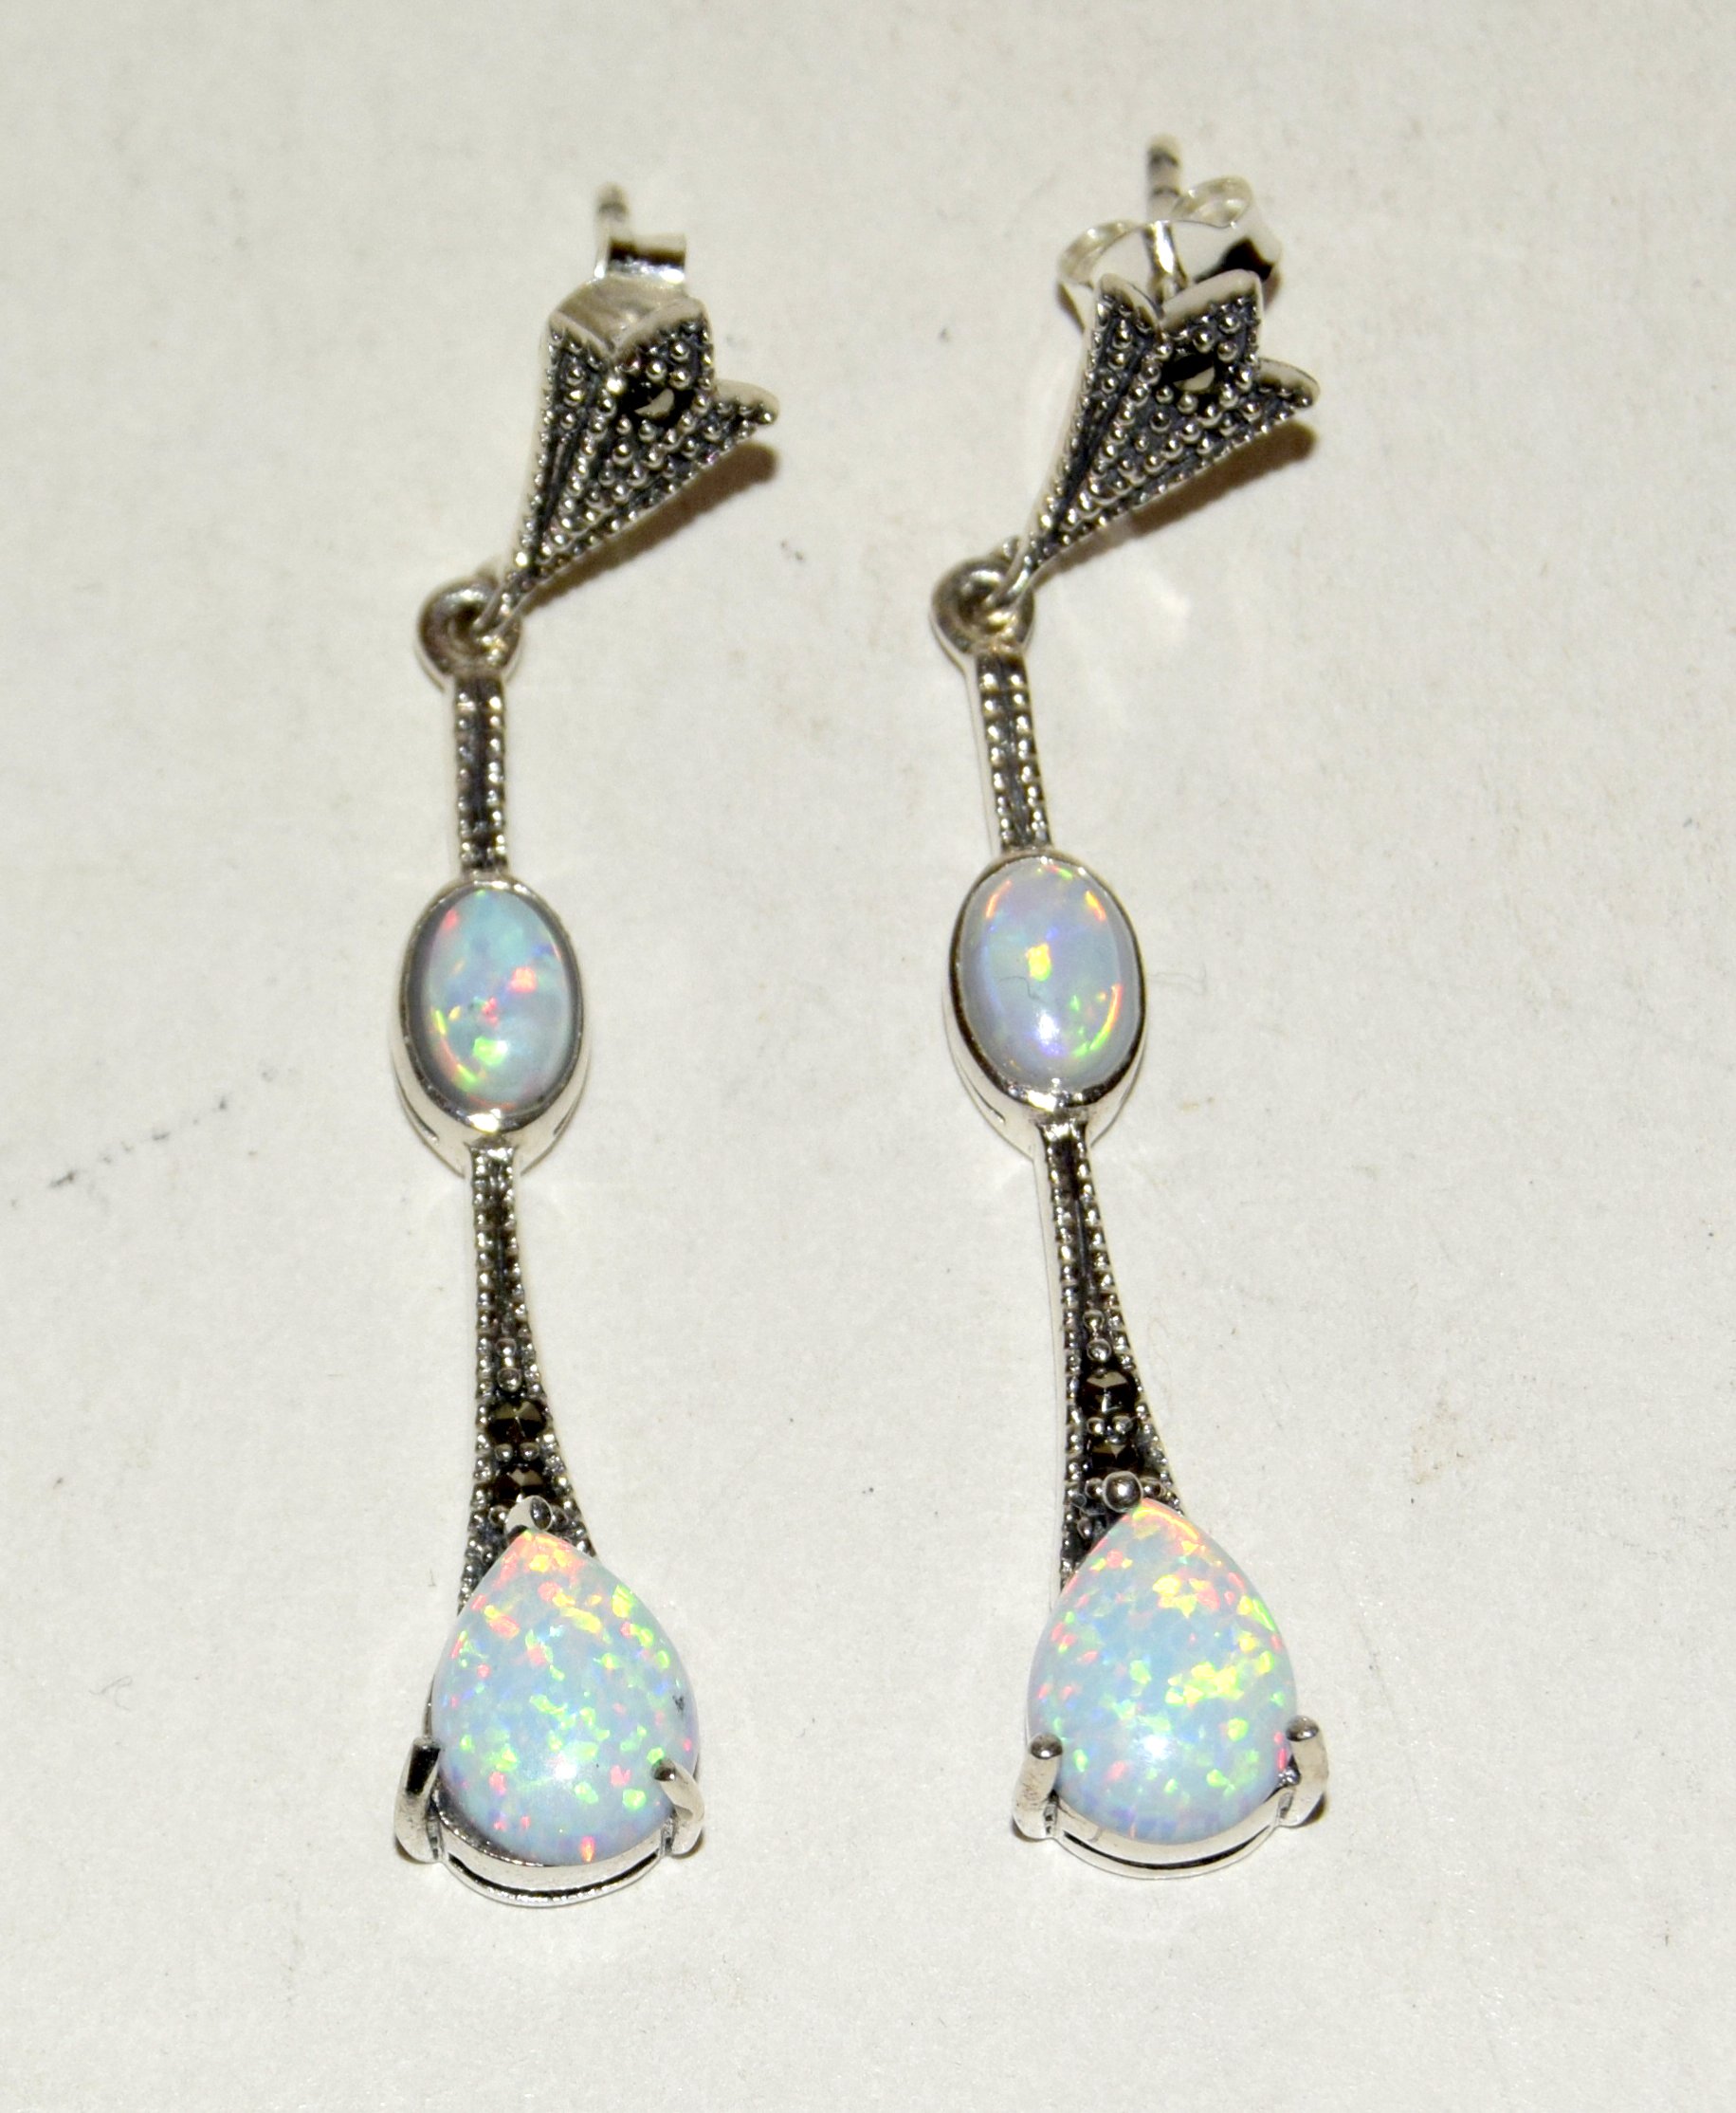 Pair of silver and opal drop earrings in the art deco style - Image 2 of 2